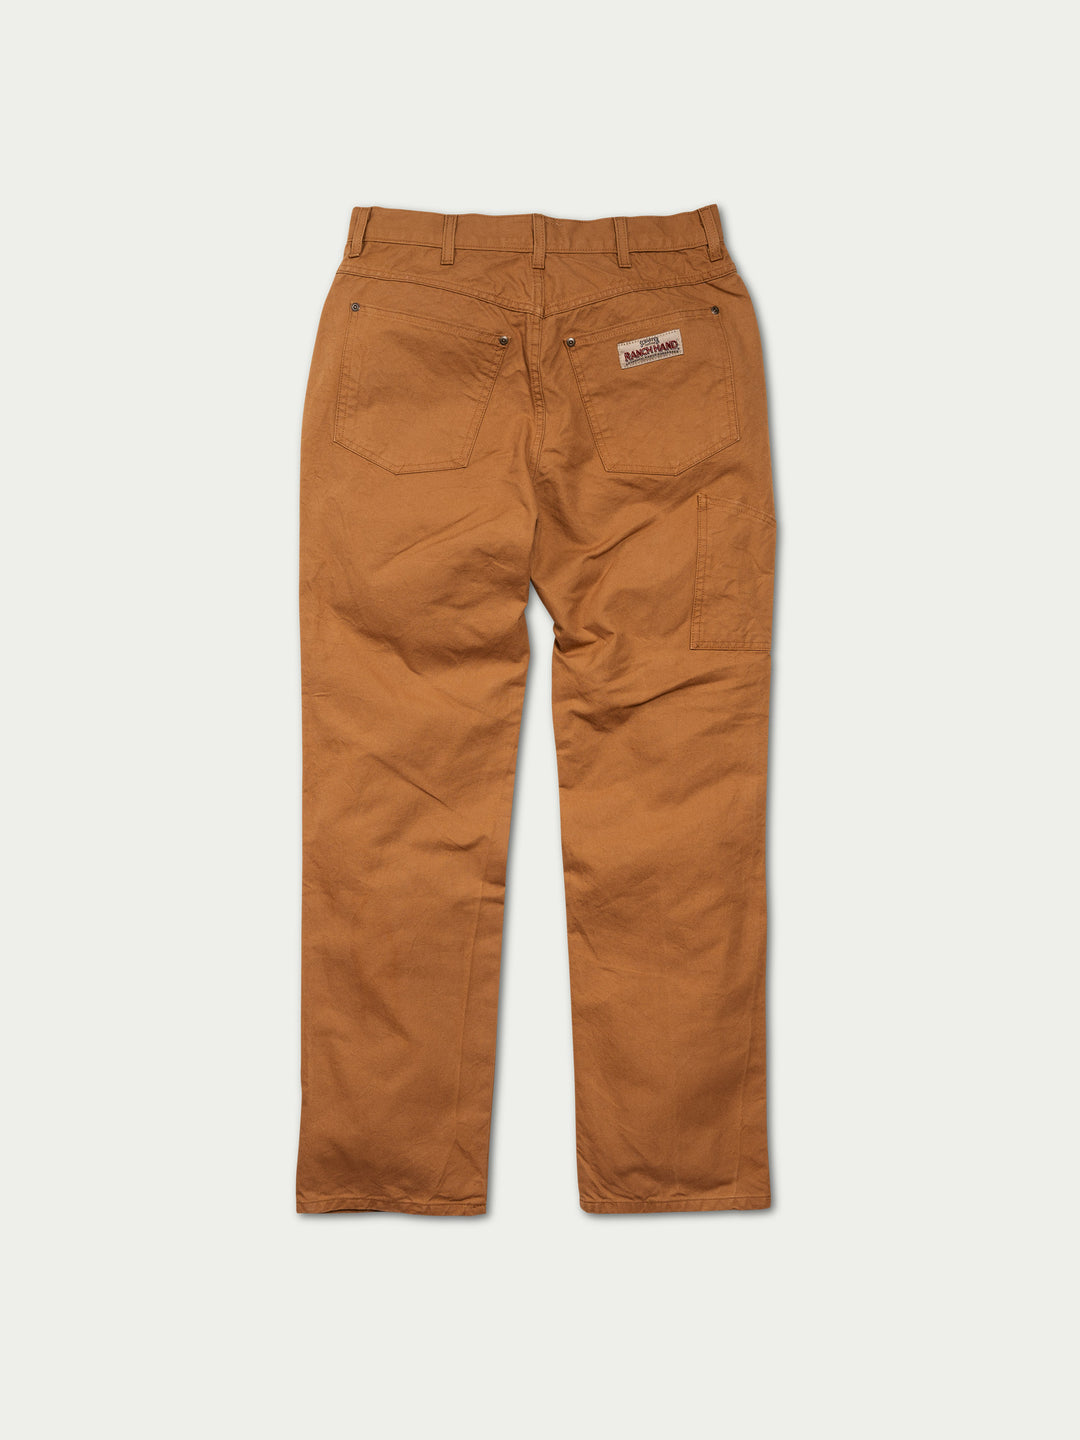 FencelineÂ® Canvas RanchHand Jeans in Saddle - Schaefer Outfitter